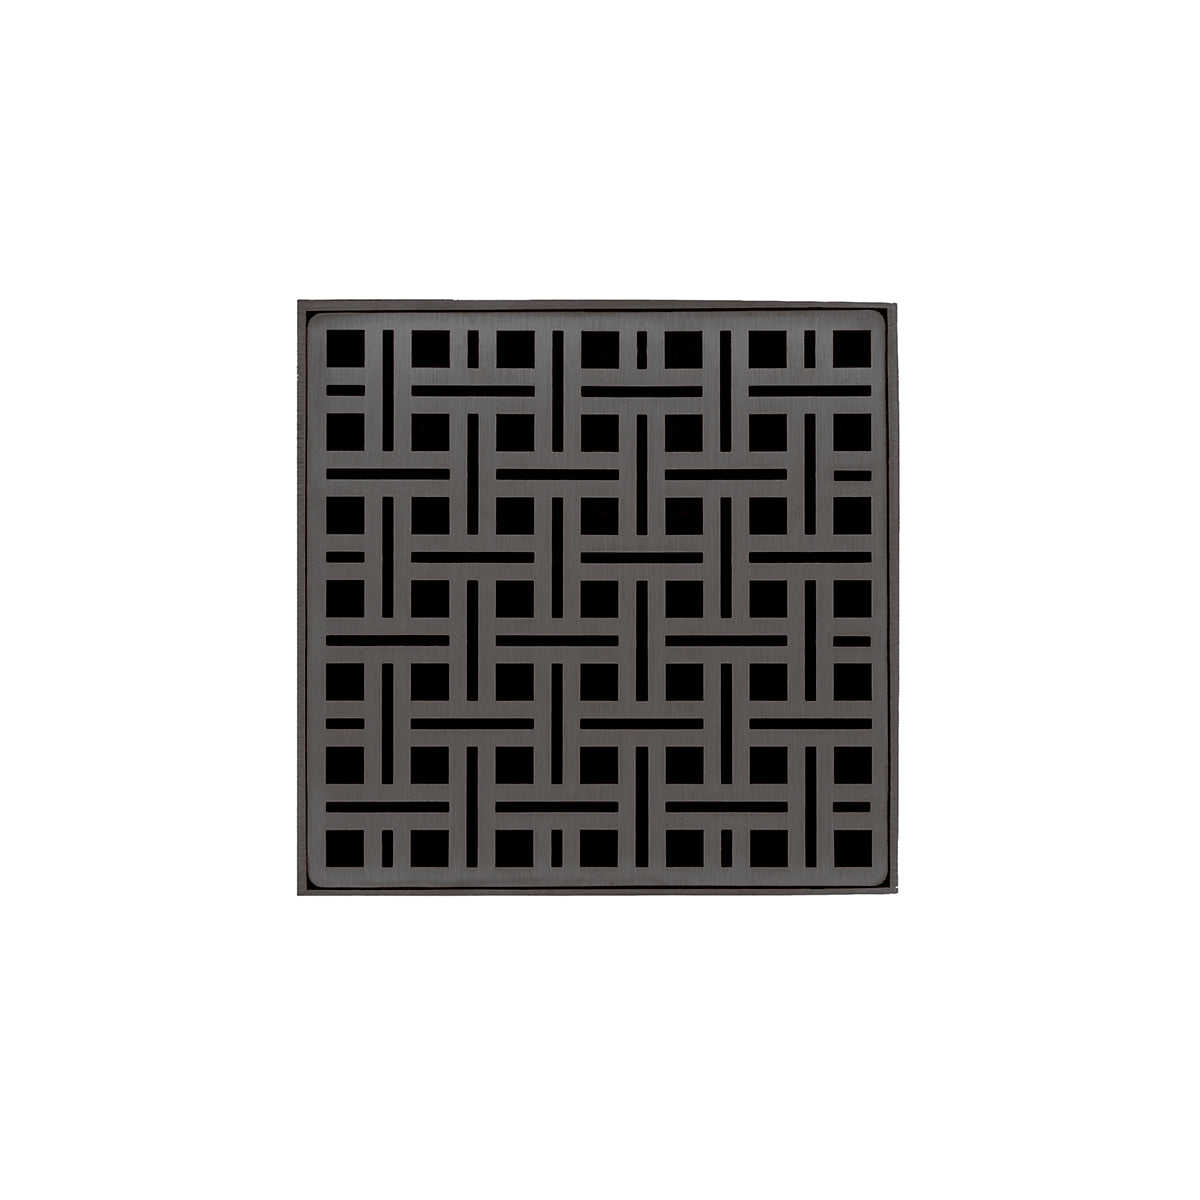 Infinity Drain 5" x 5" VDB 5 Premium Center Drain Kit with Weave Pattern Decorative Plate with ABS Bonded Flange Drain Body, 2", 3" and 4" Outlet